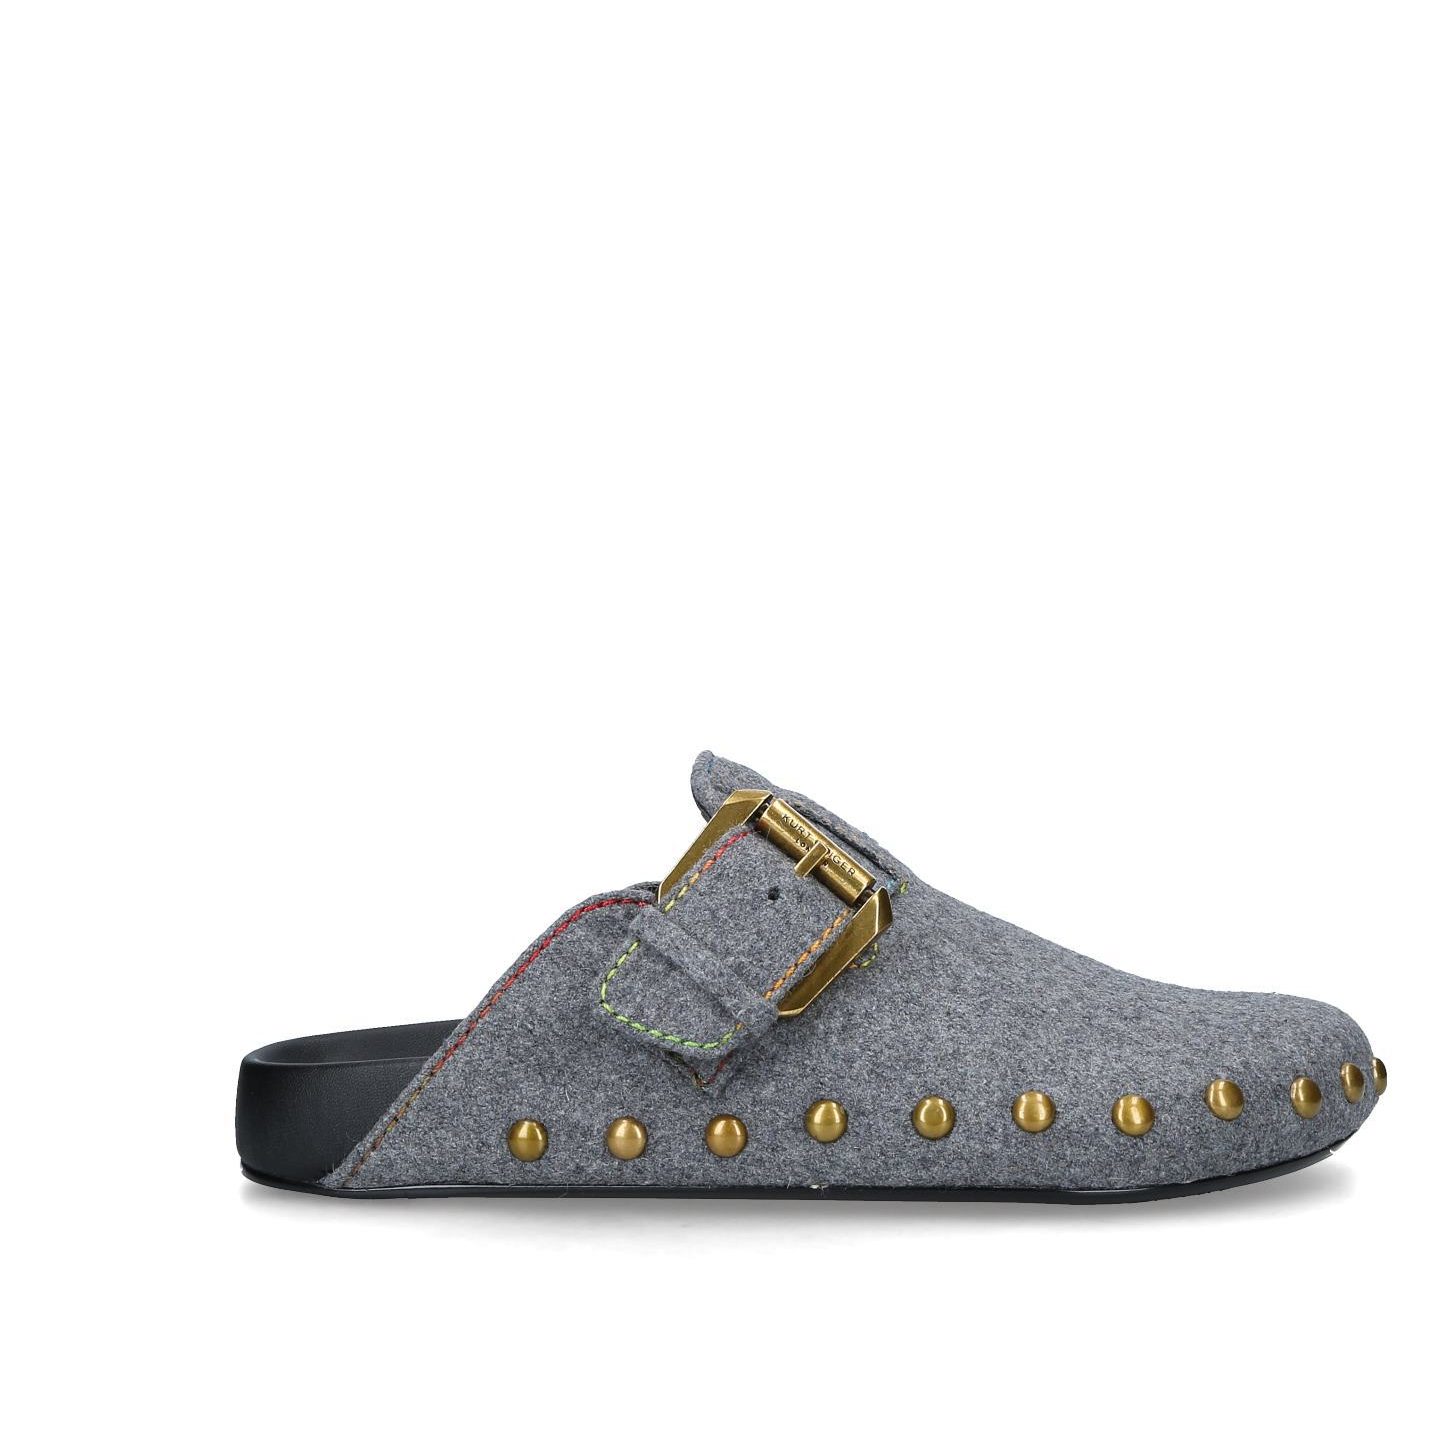 Denim studded clogs from Kurt Geiger London with multicoloured stitching